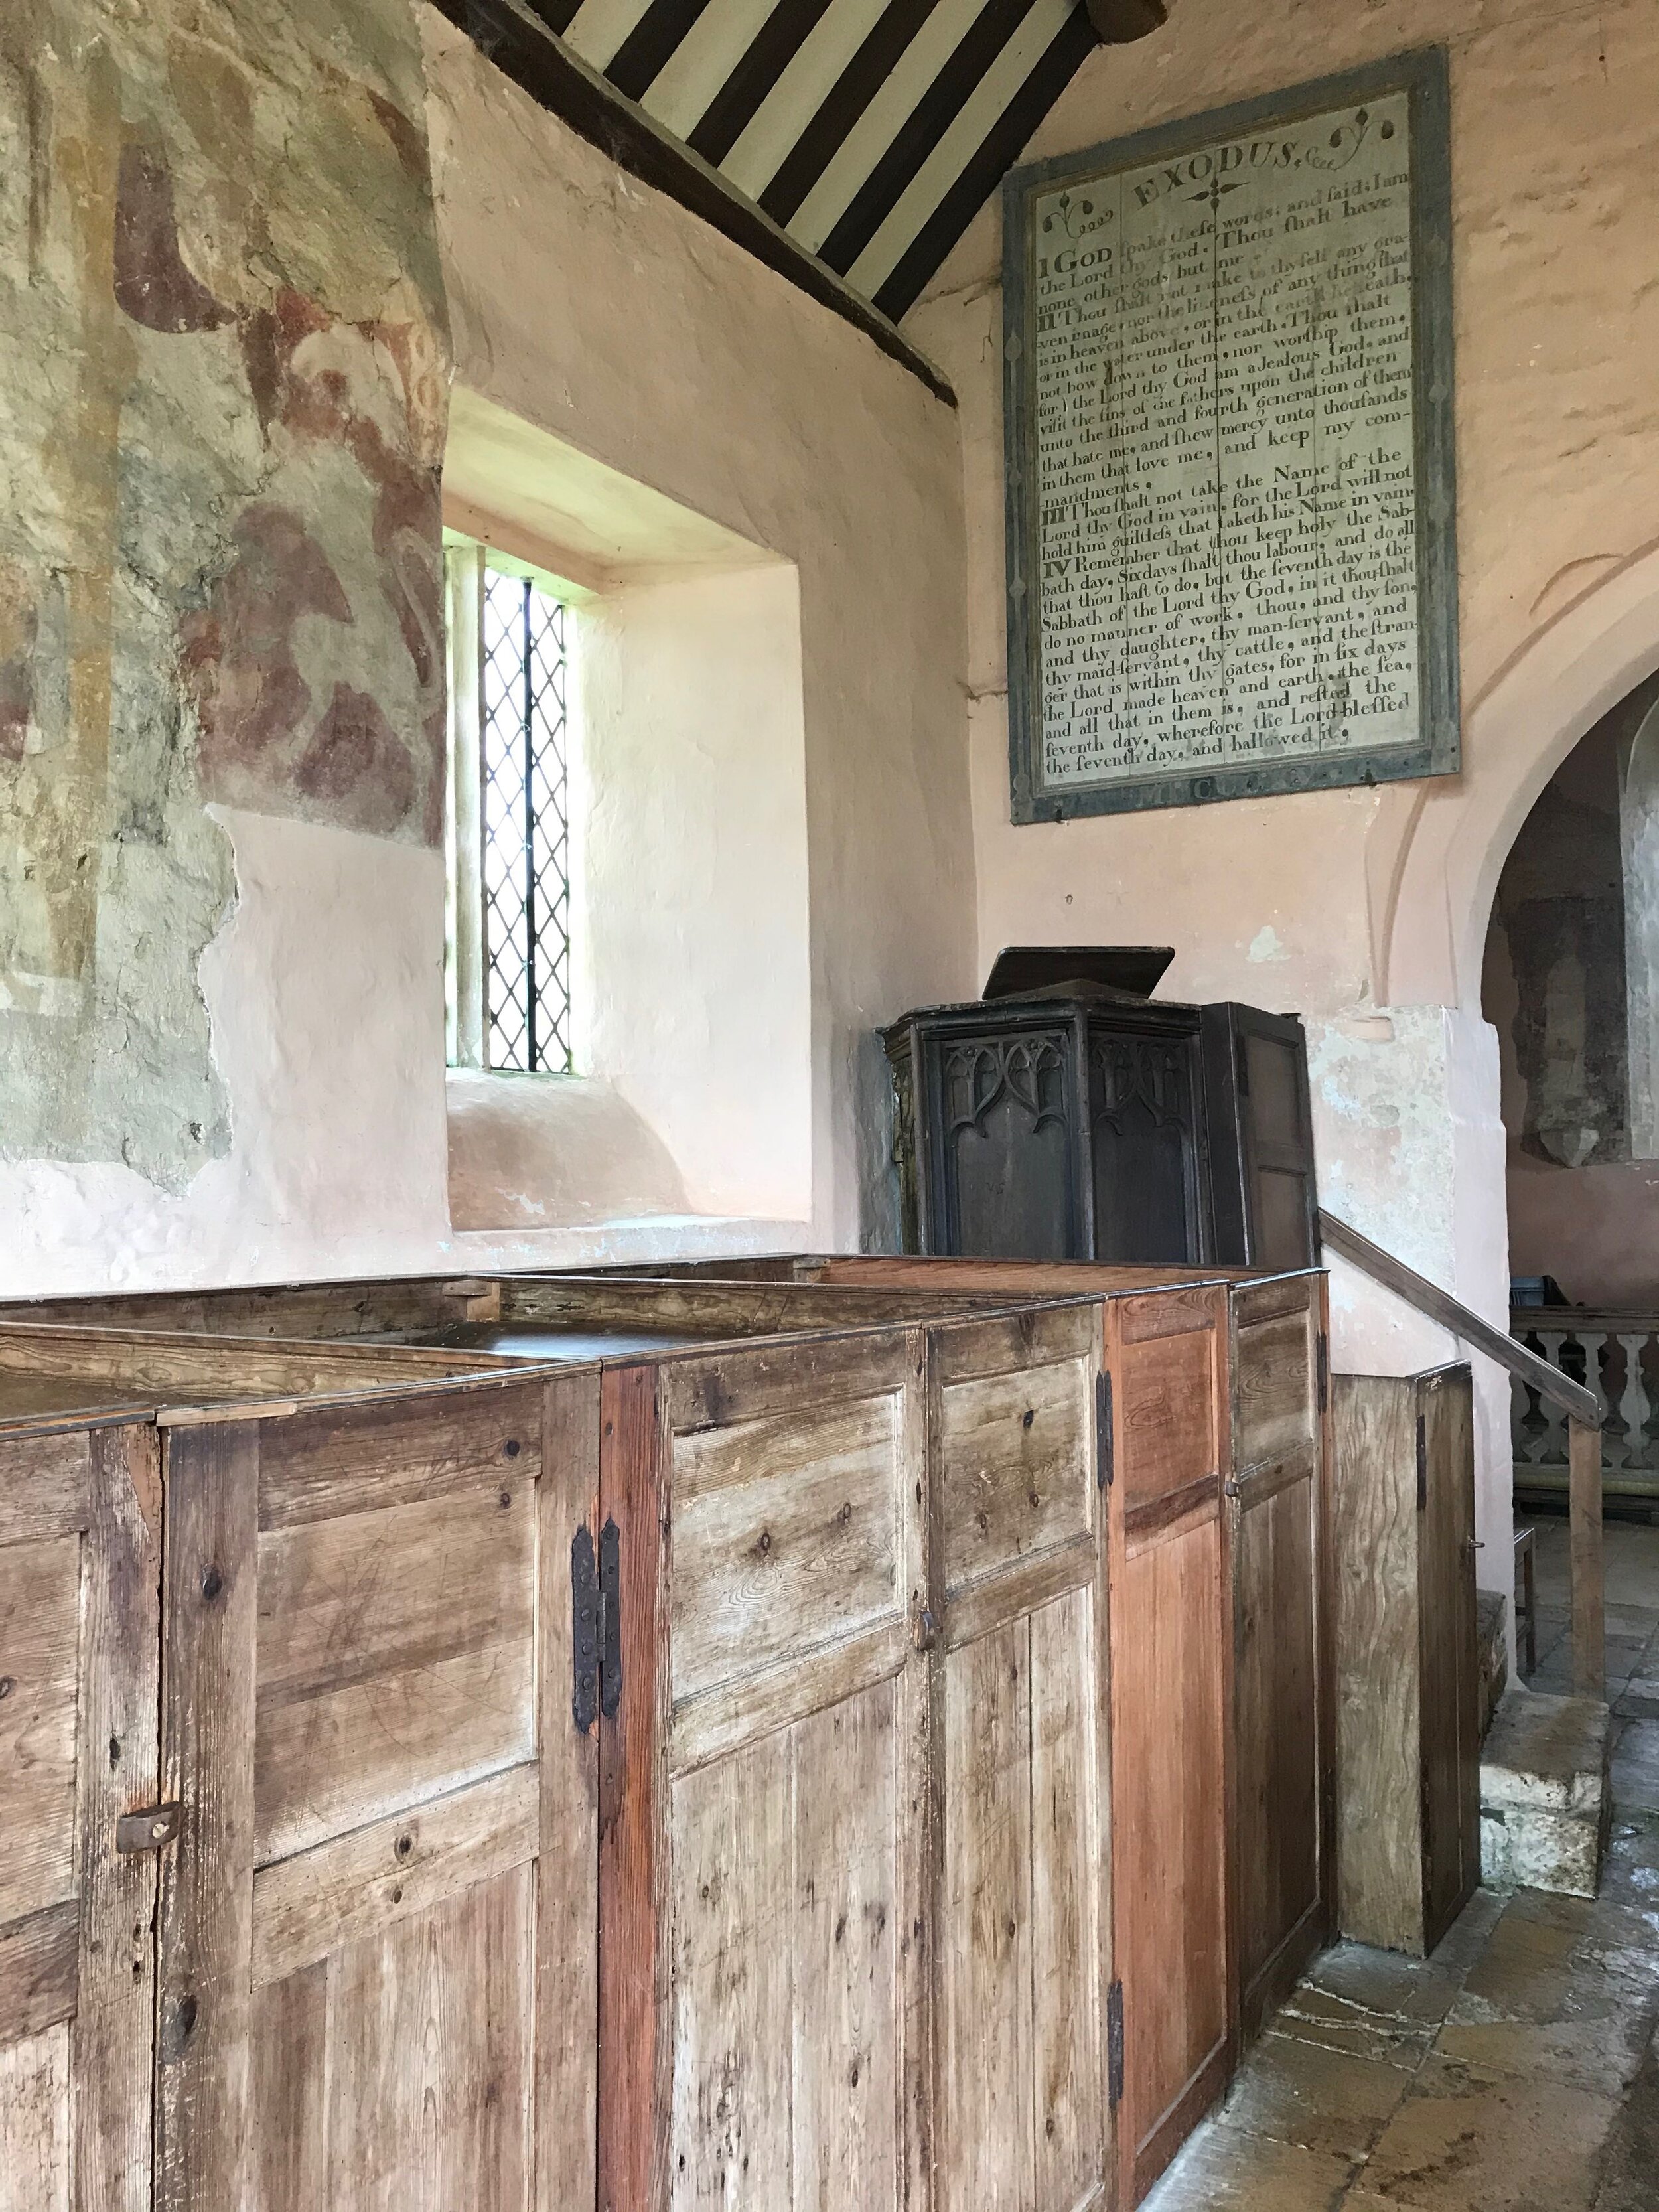 Box pews in St Oswald's Church